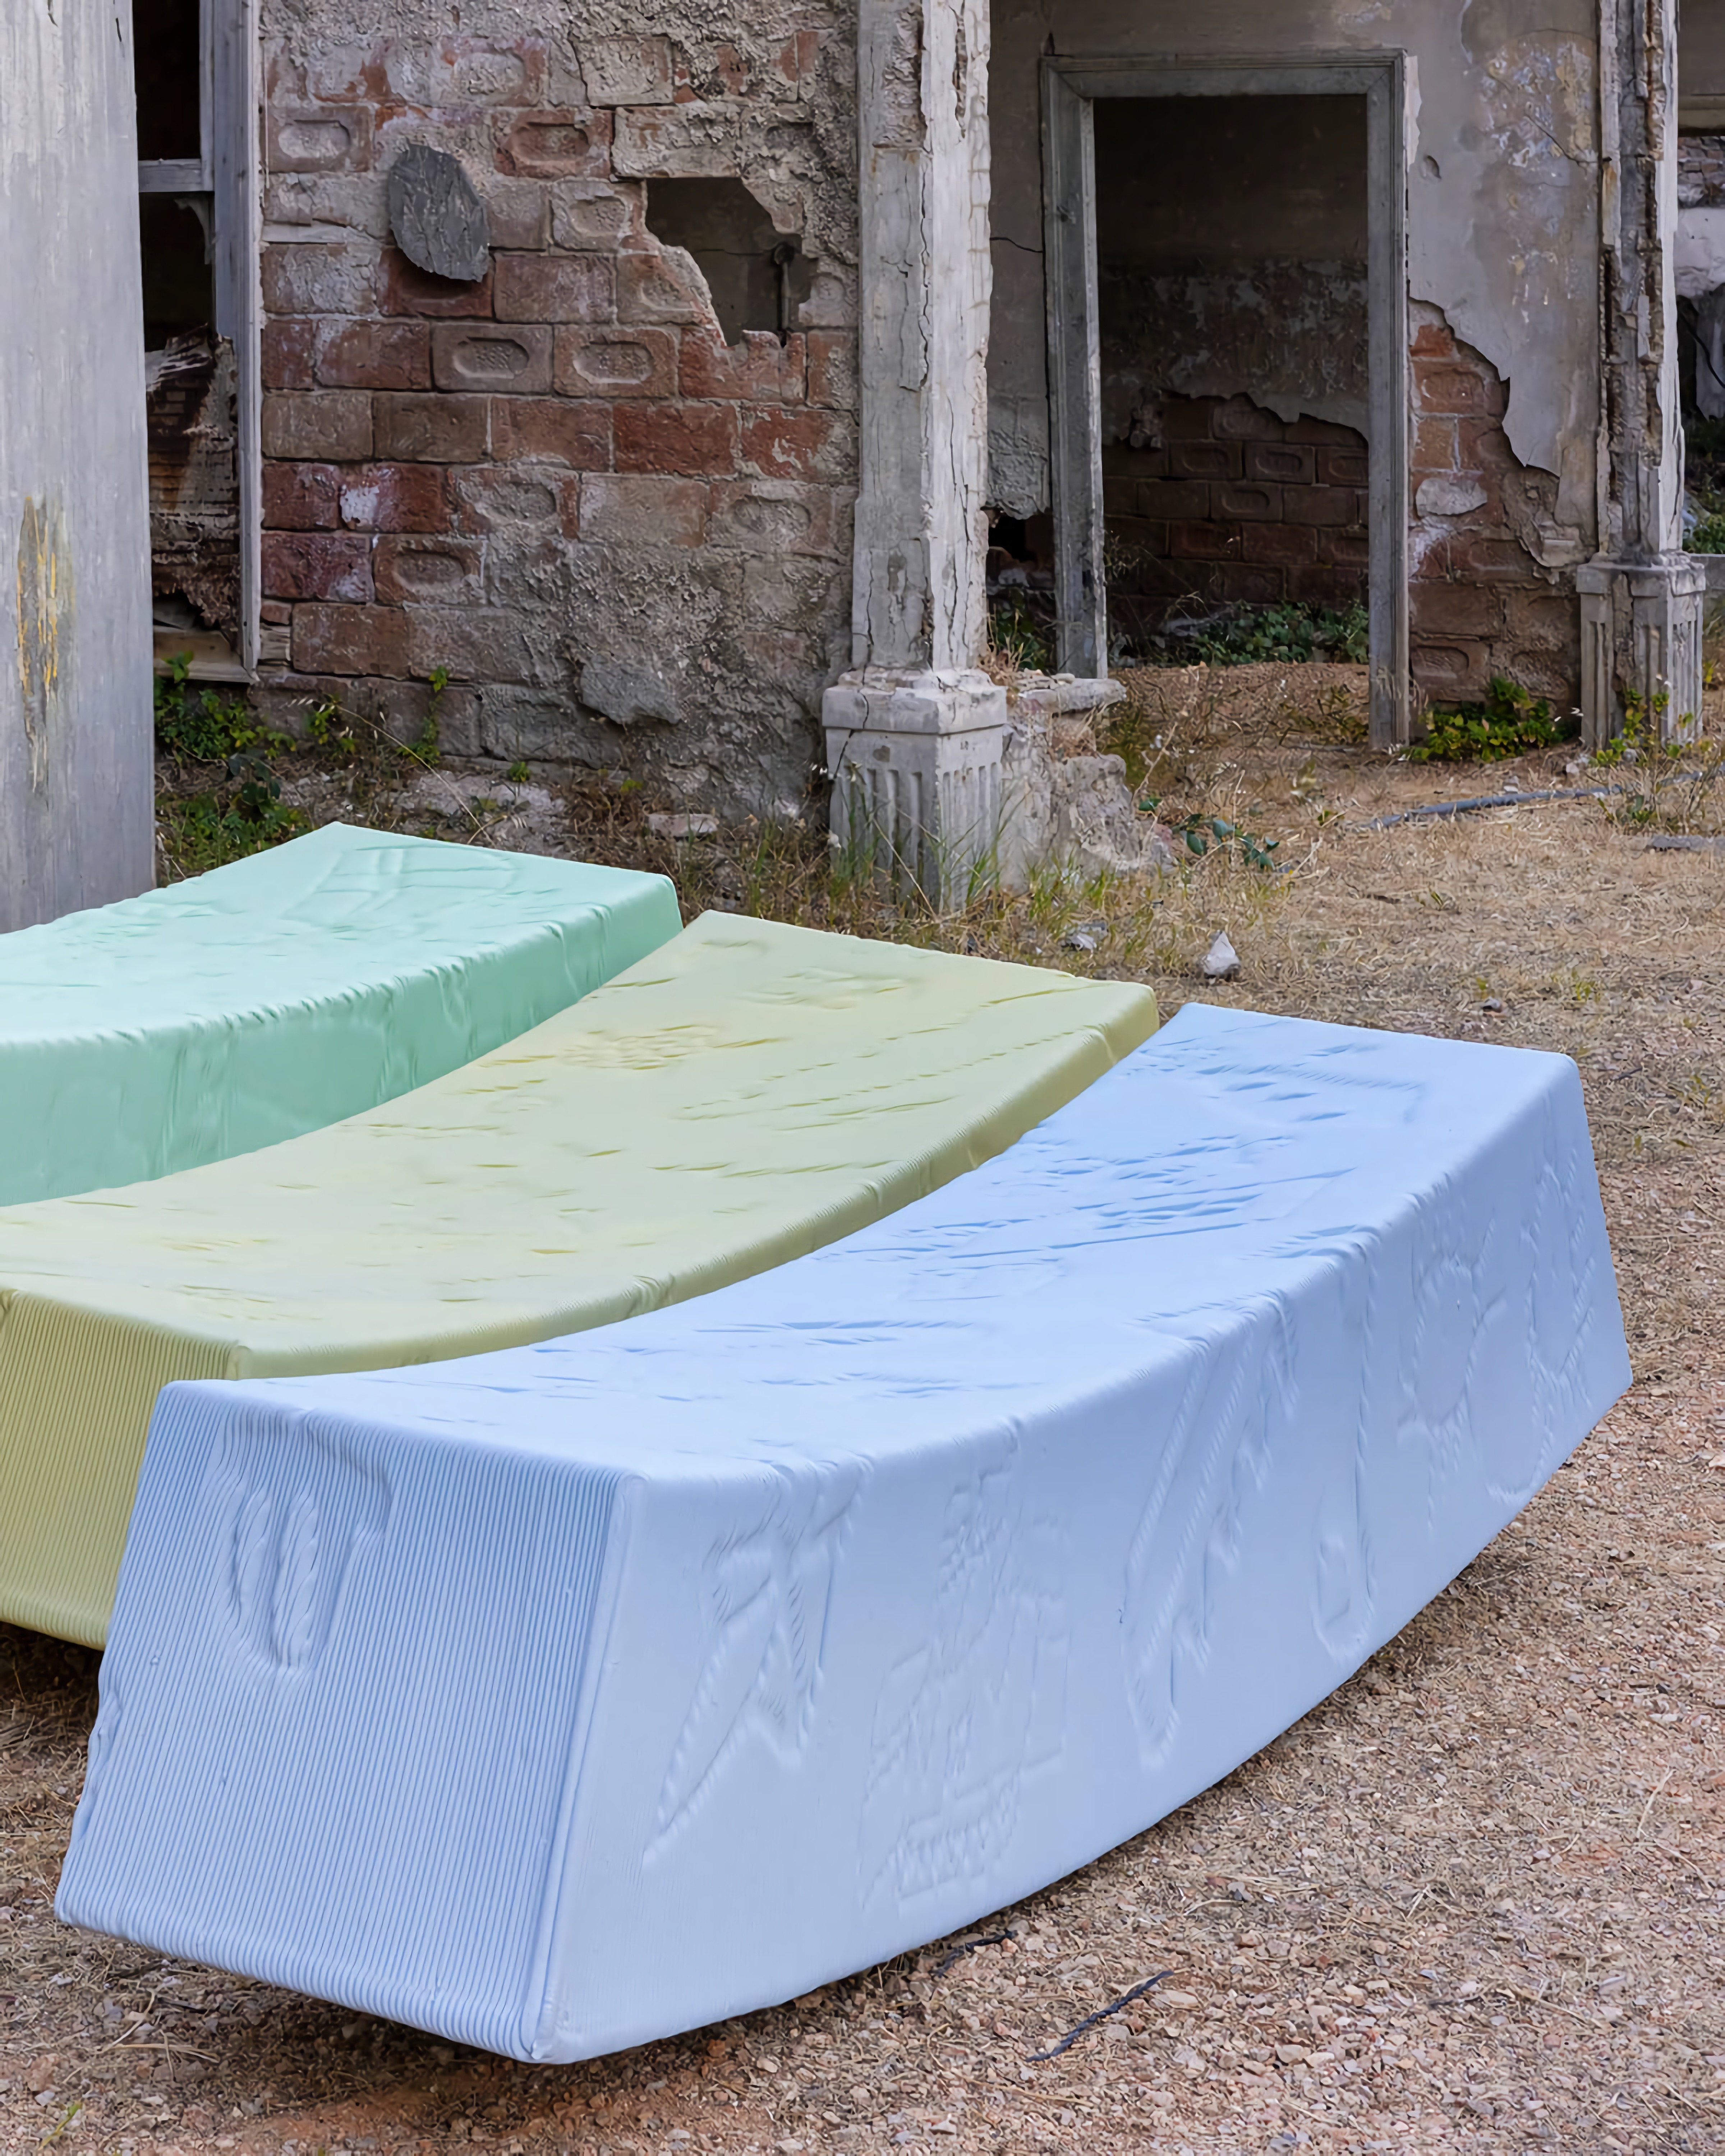 GLYPH: Artistic Furniture from Recycled Plastic and Children's Drawings